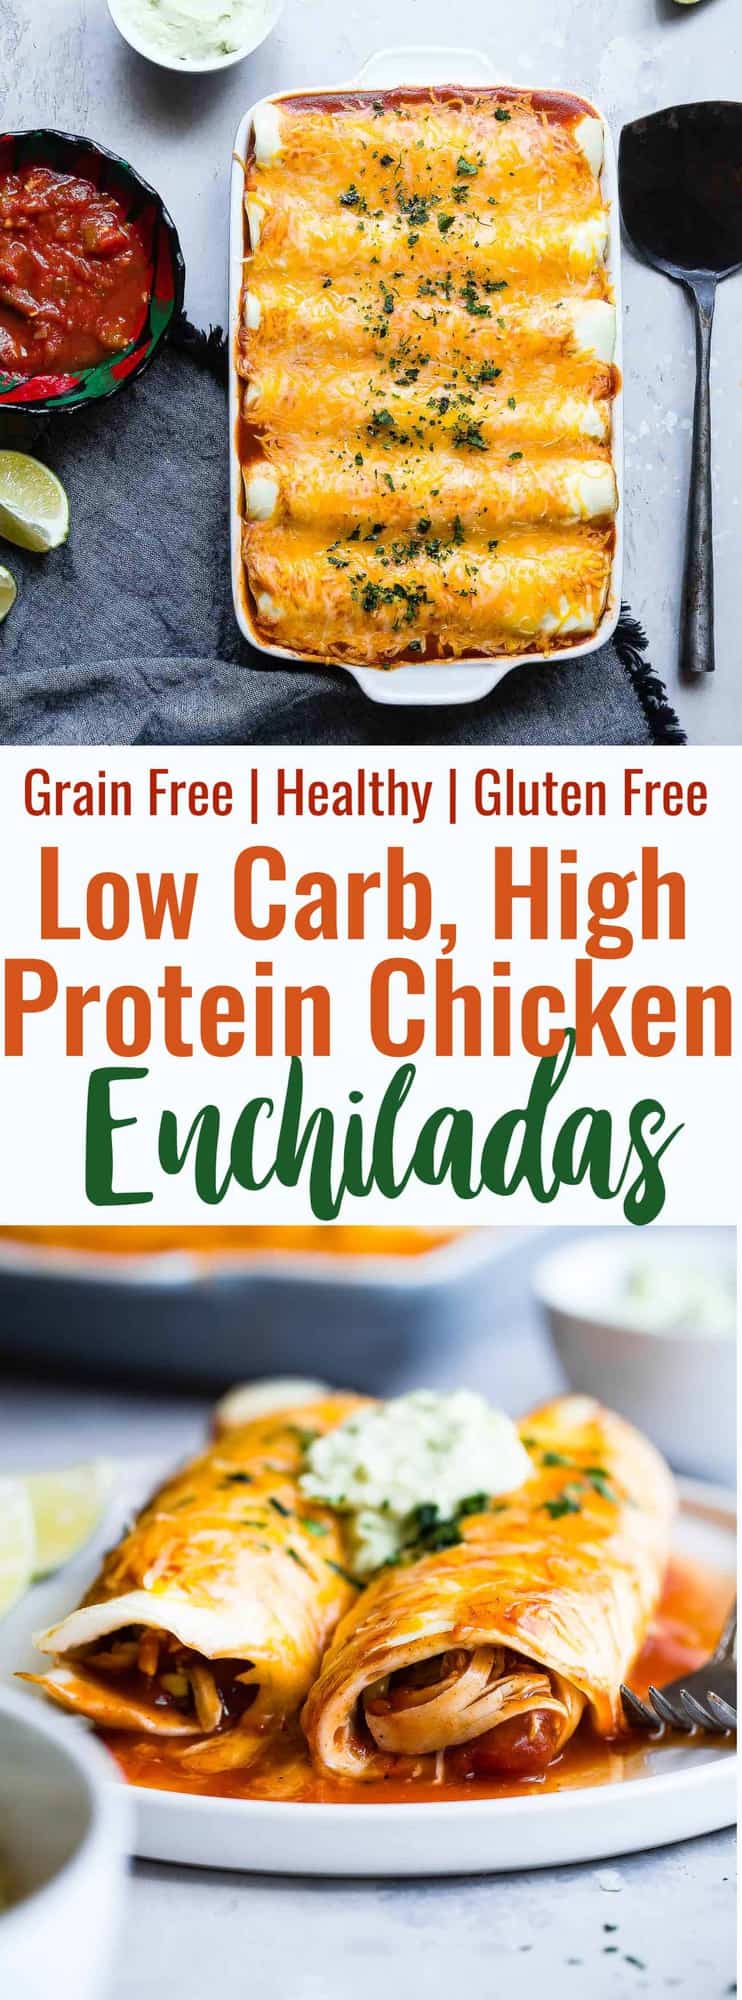 Healthy Low Carb Chicken Enchiladas - This gluten free Healthy Low Carb Chicken Enchilada Recipe uses a secret ingredient to make it low carb, protein PACKED and under 500 calories for a HUGE serving! These do NOT taste healthy and even picky eaters love them! | #Foodfaithfitness | #Lowcarb #Glutenfree #Healthy #Grainfree #Enchiladas 